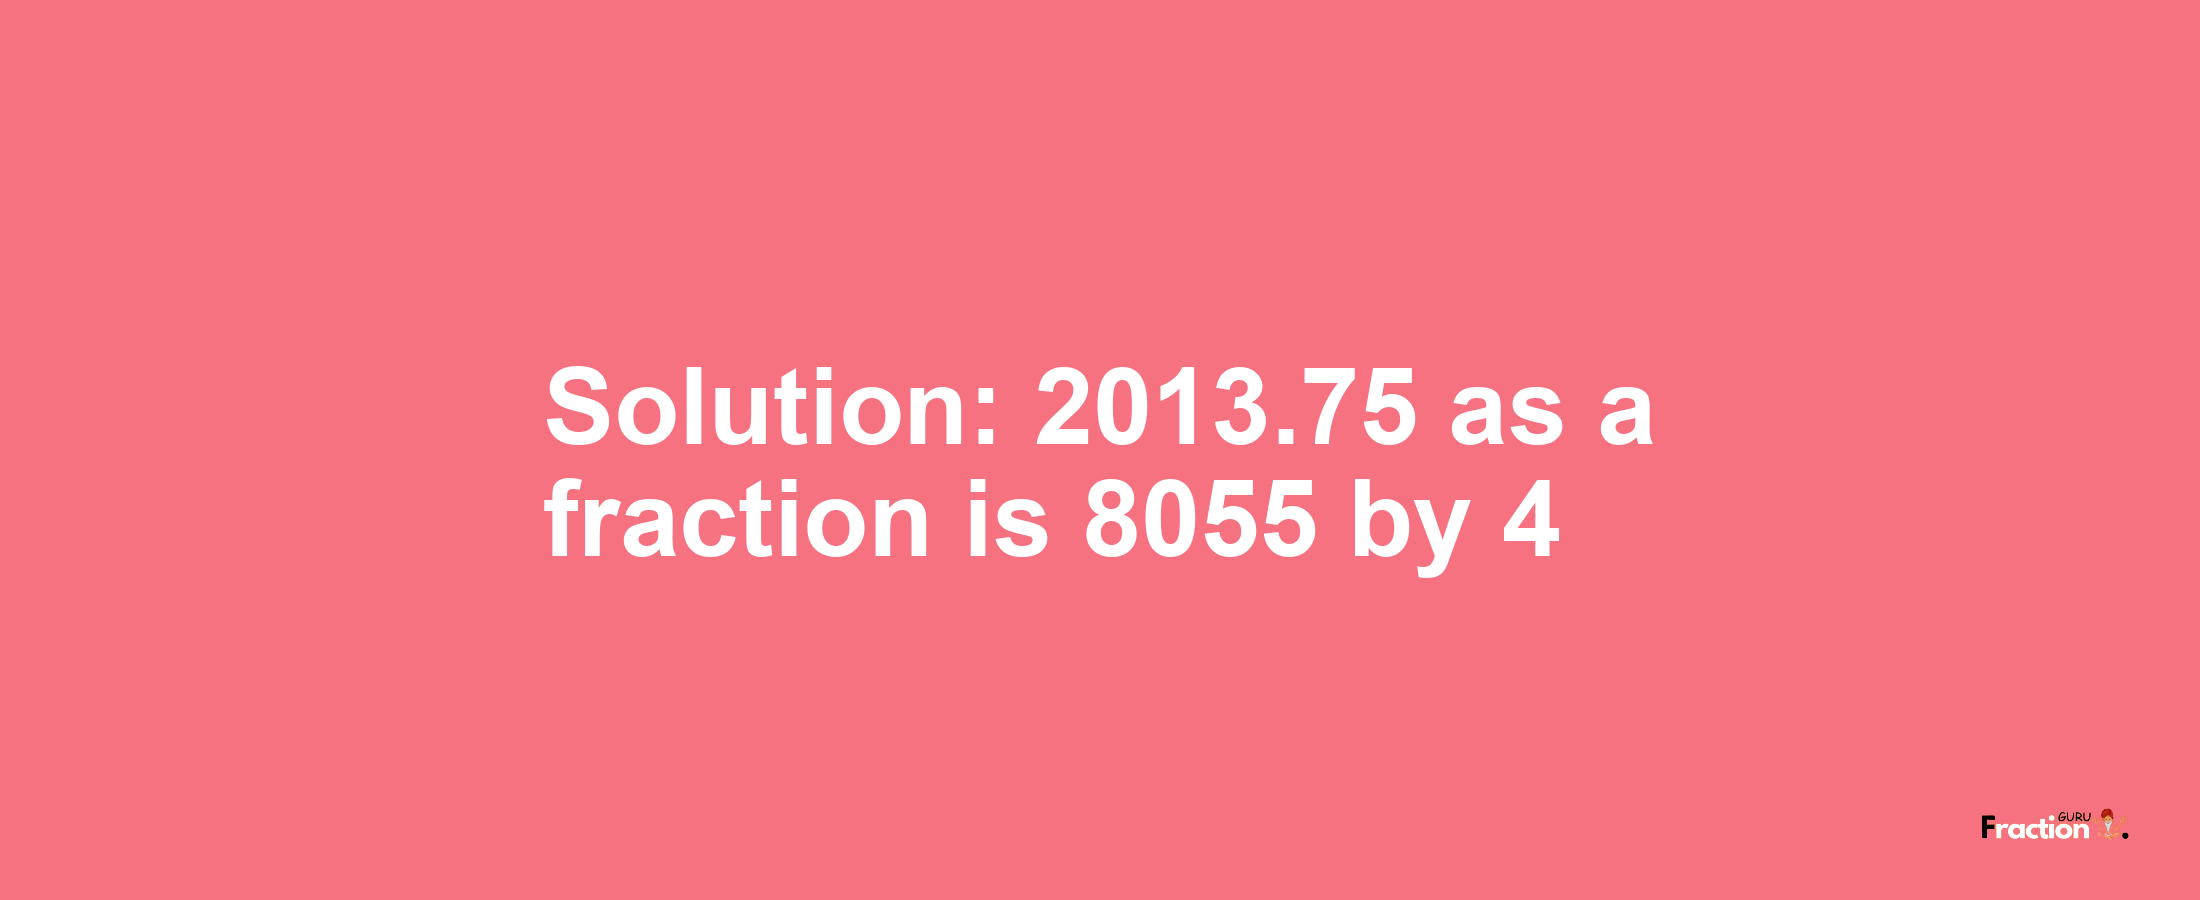 Solution:2013.75 as a fraction is 8055/4